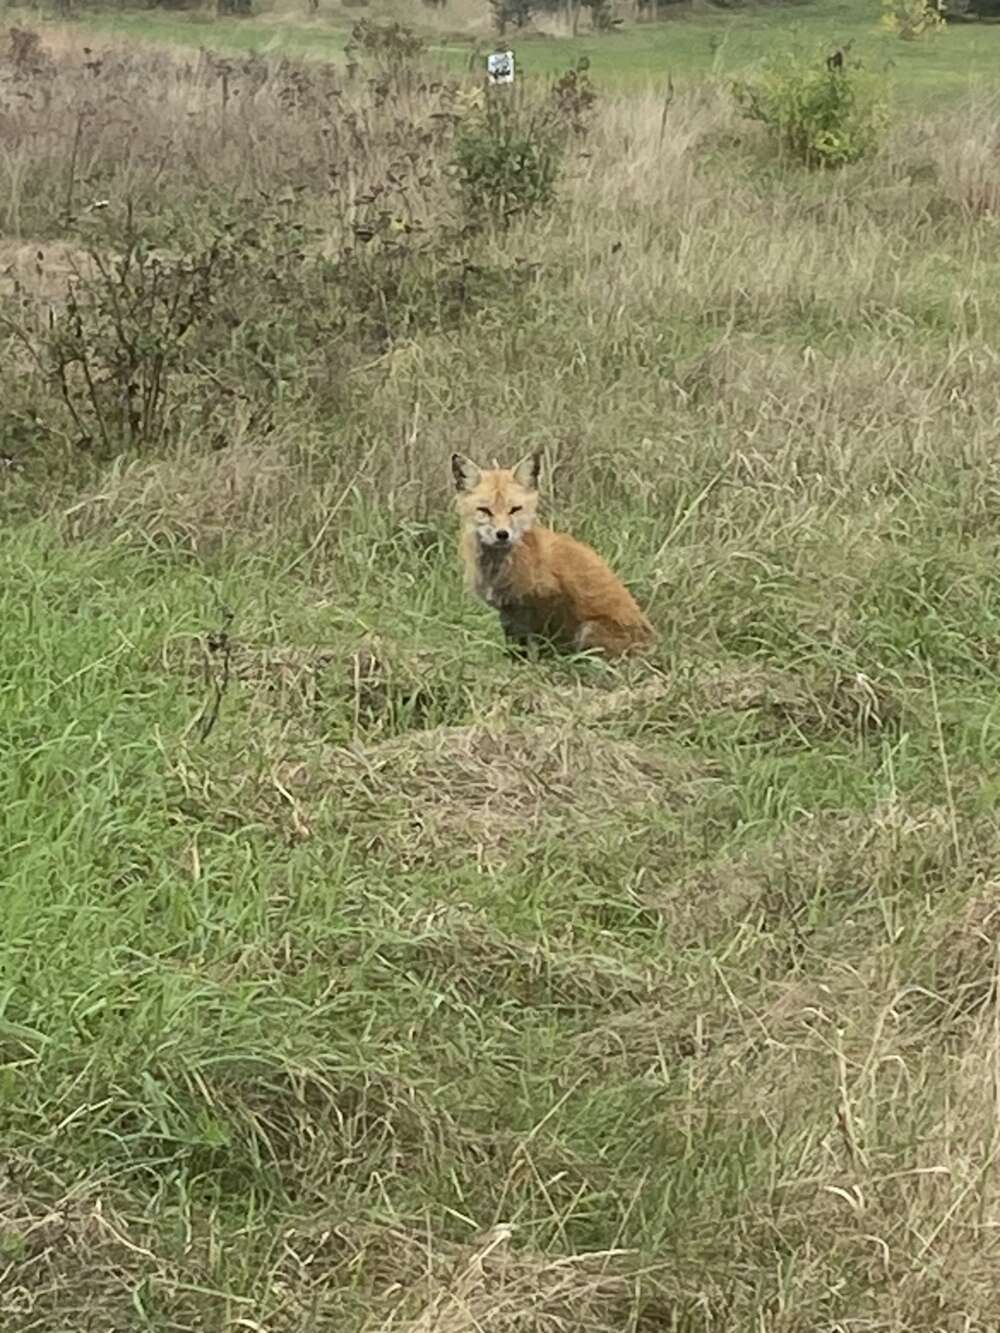 Red fox in field northwest of the Laudholm farmhouse. Photo: Linda Littlefield Grenfell.